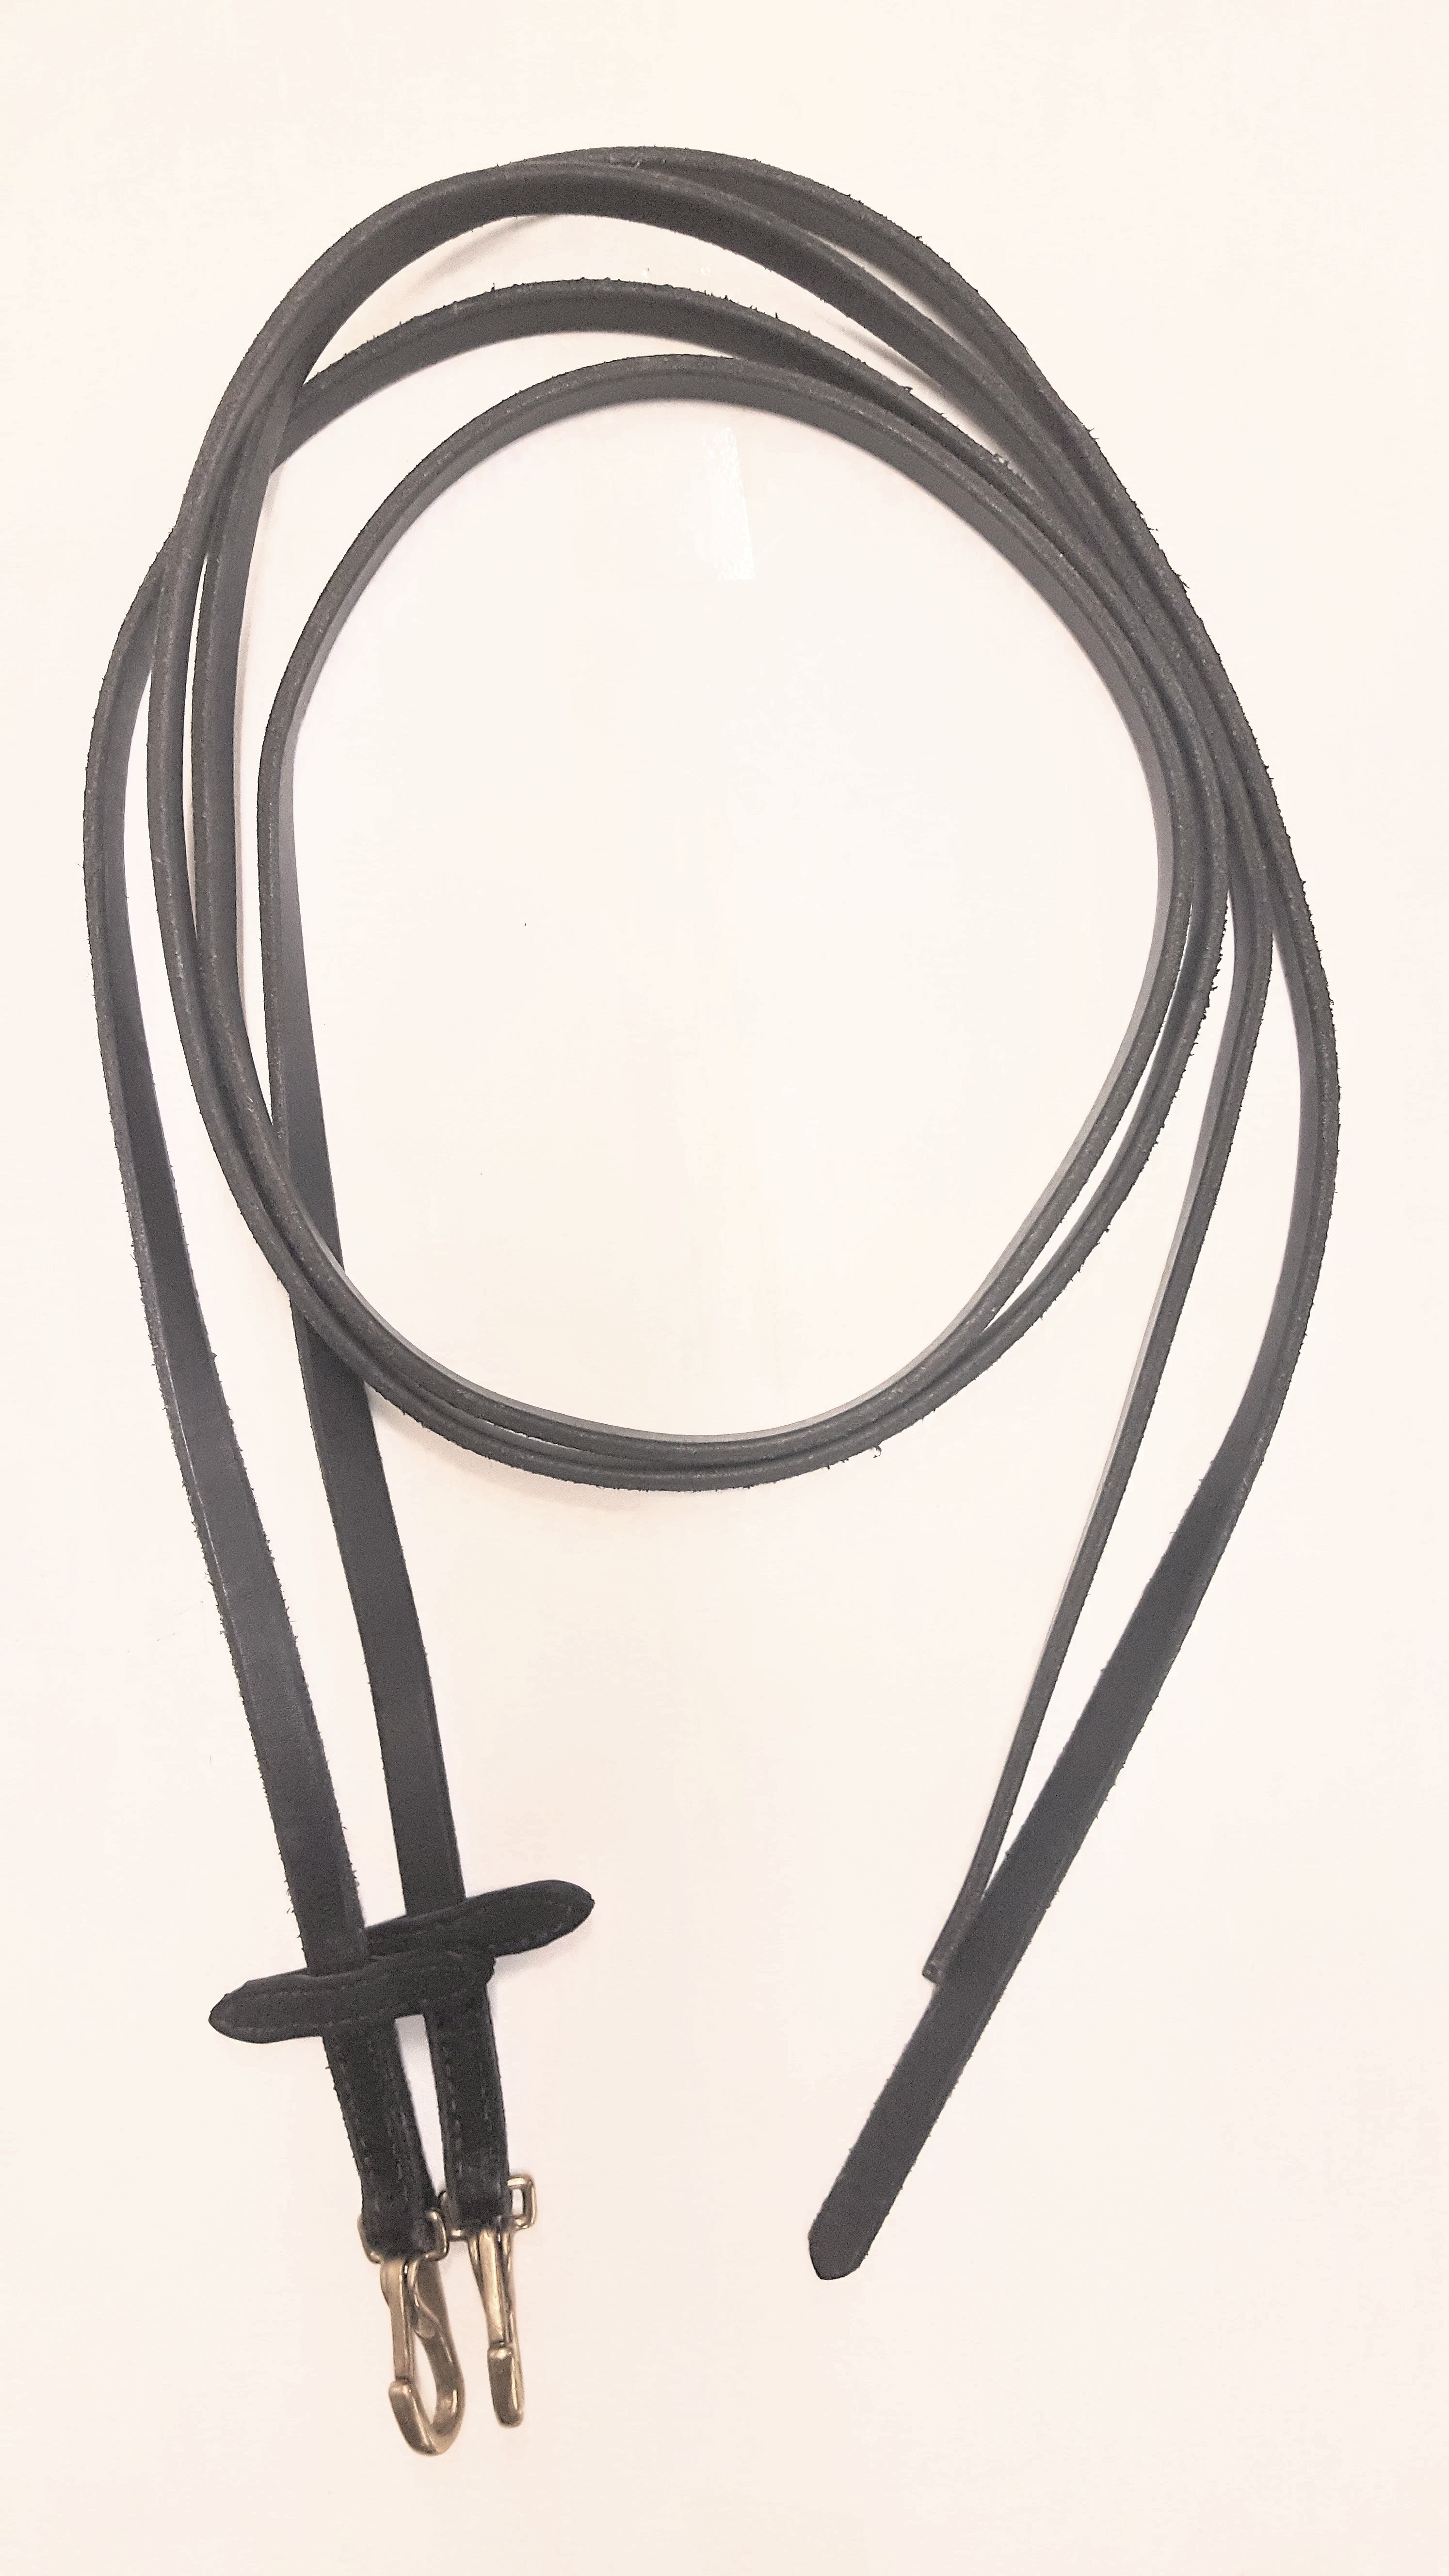 7' Split Leather Reins with or without Martingale Stops